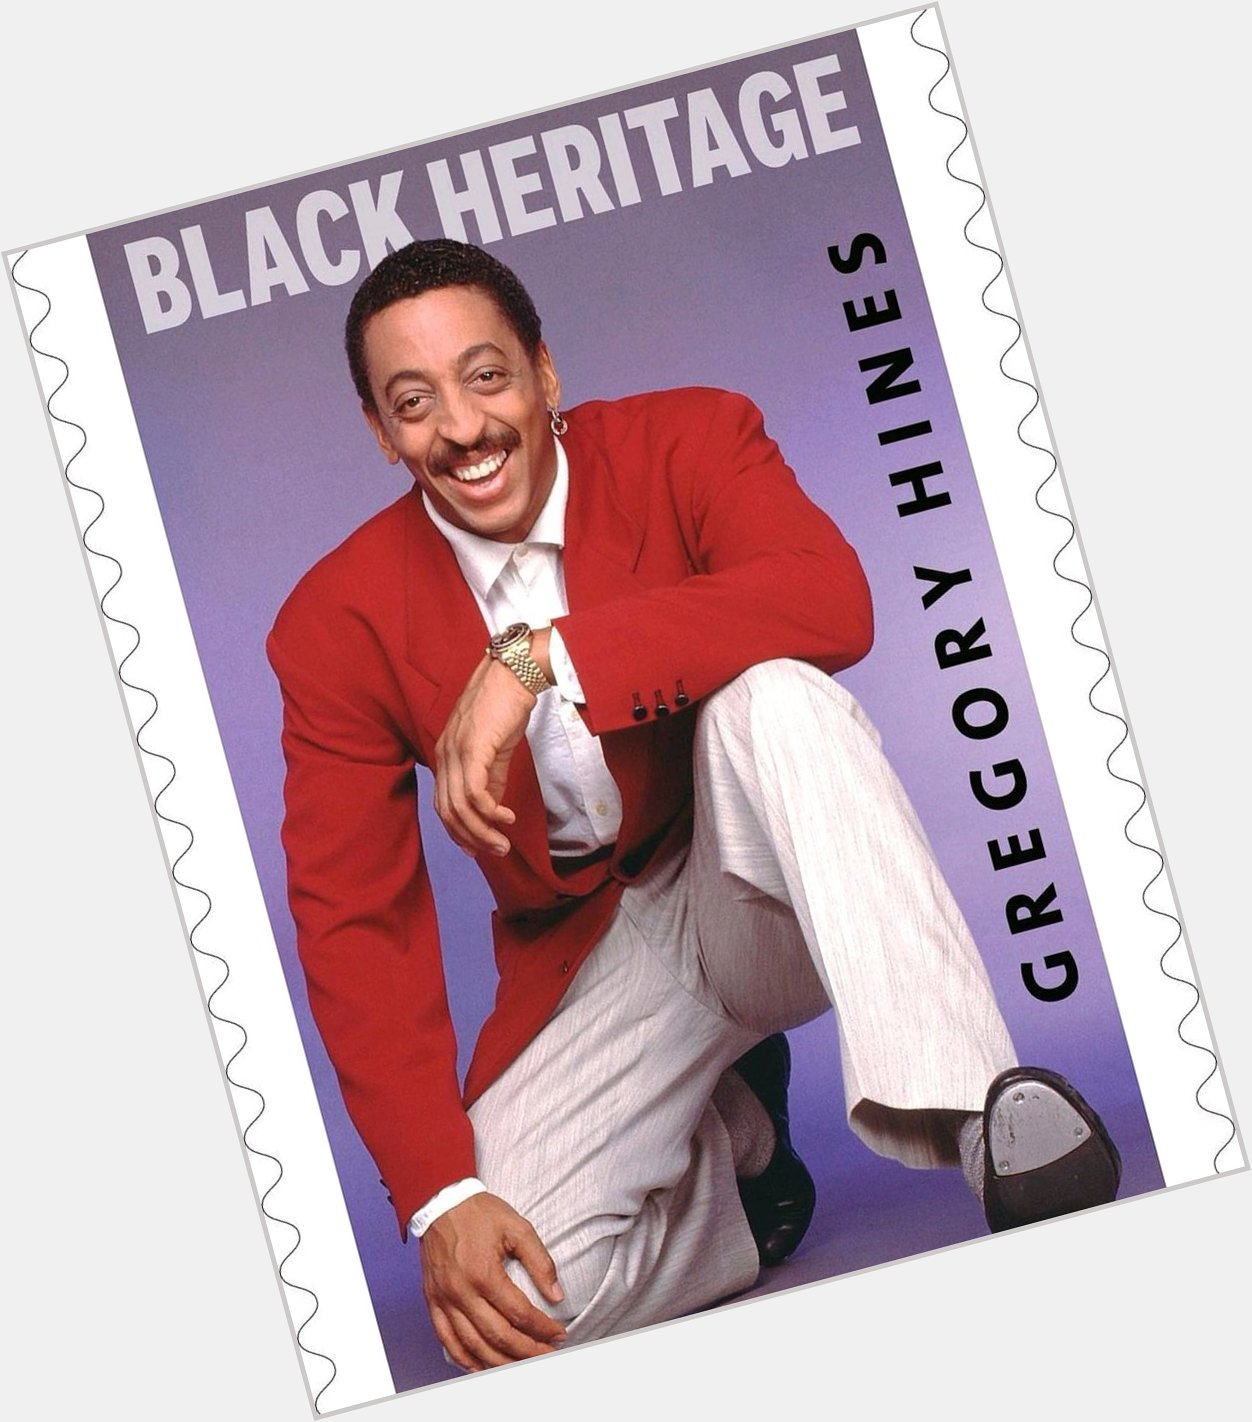 HAPPY HEAVENLY BIRTHDAY GREGORY HINES. FEBRUARY 14TH 1946 - AUGUST 9TH 2003 